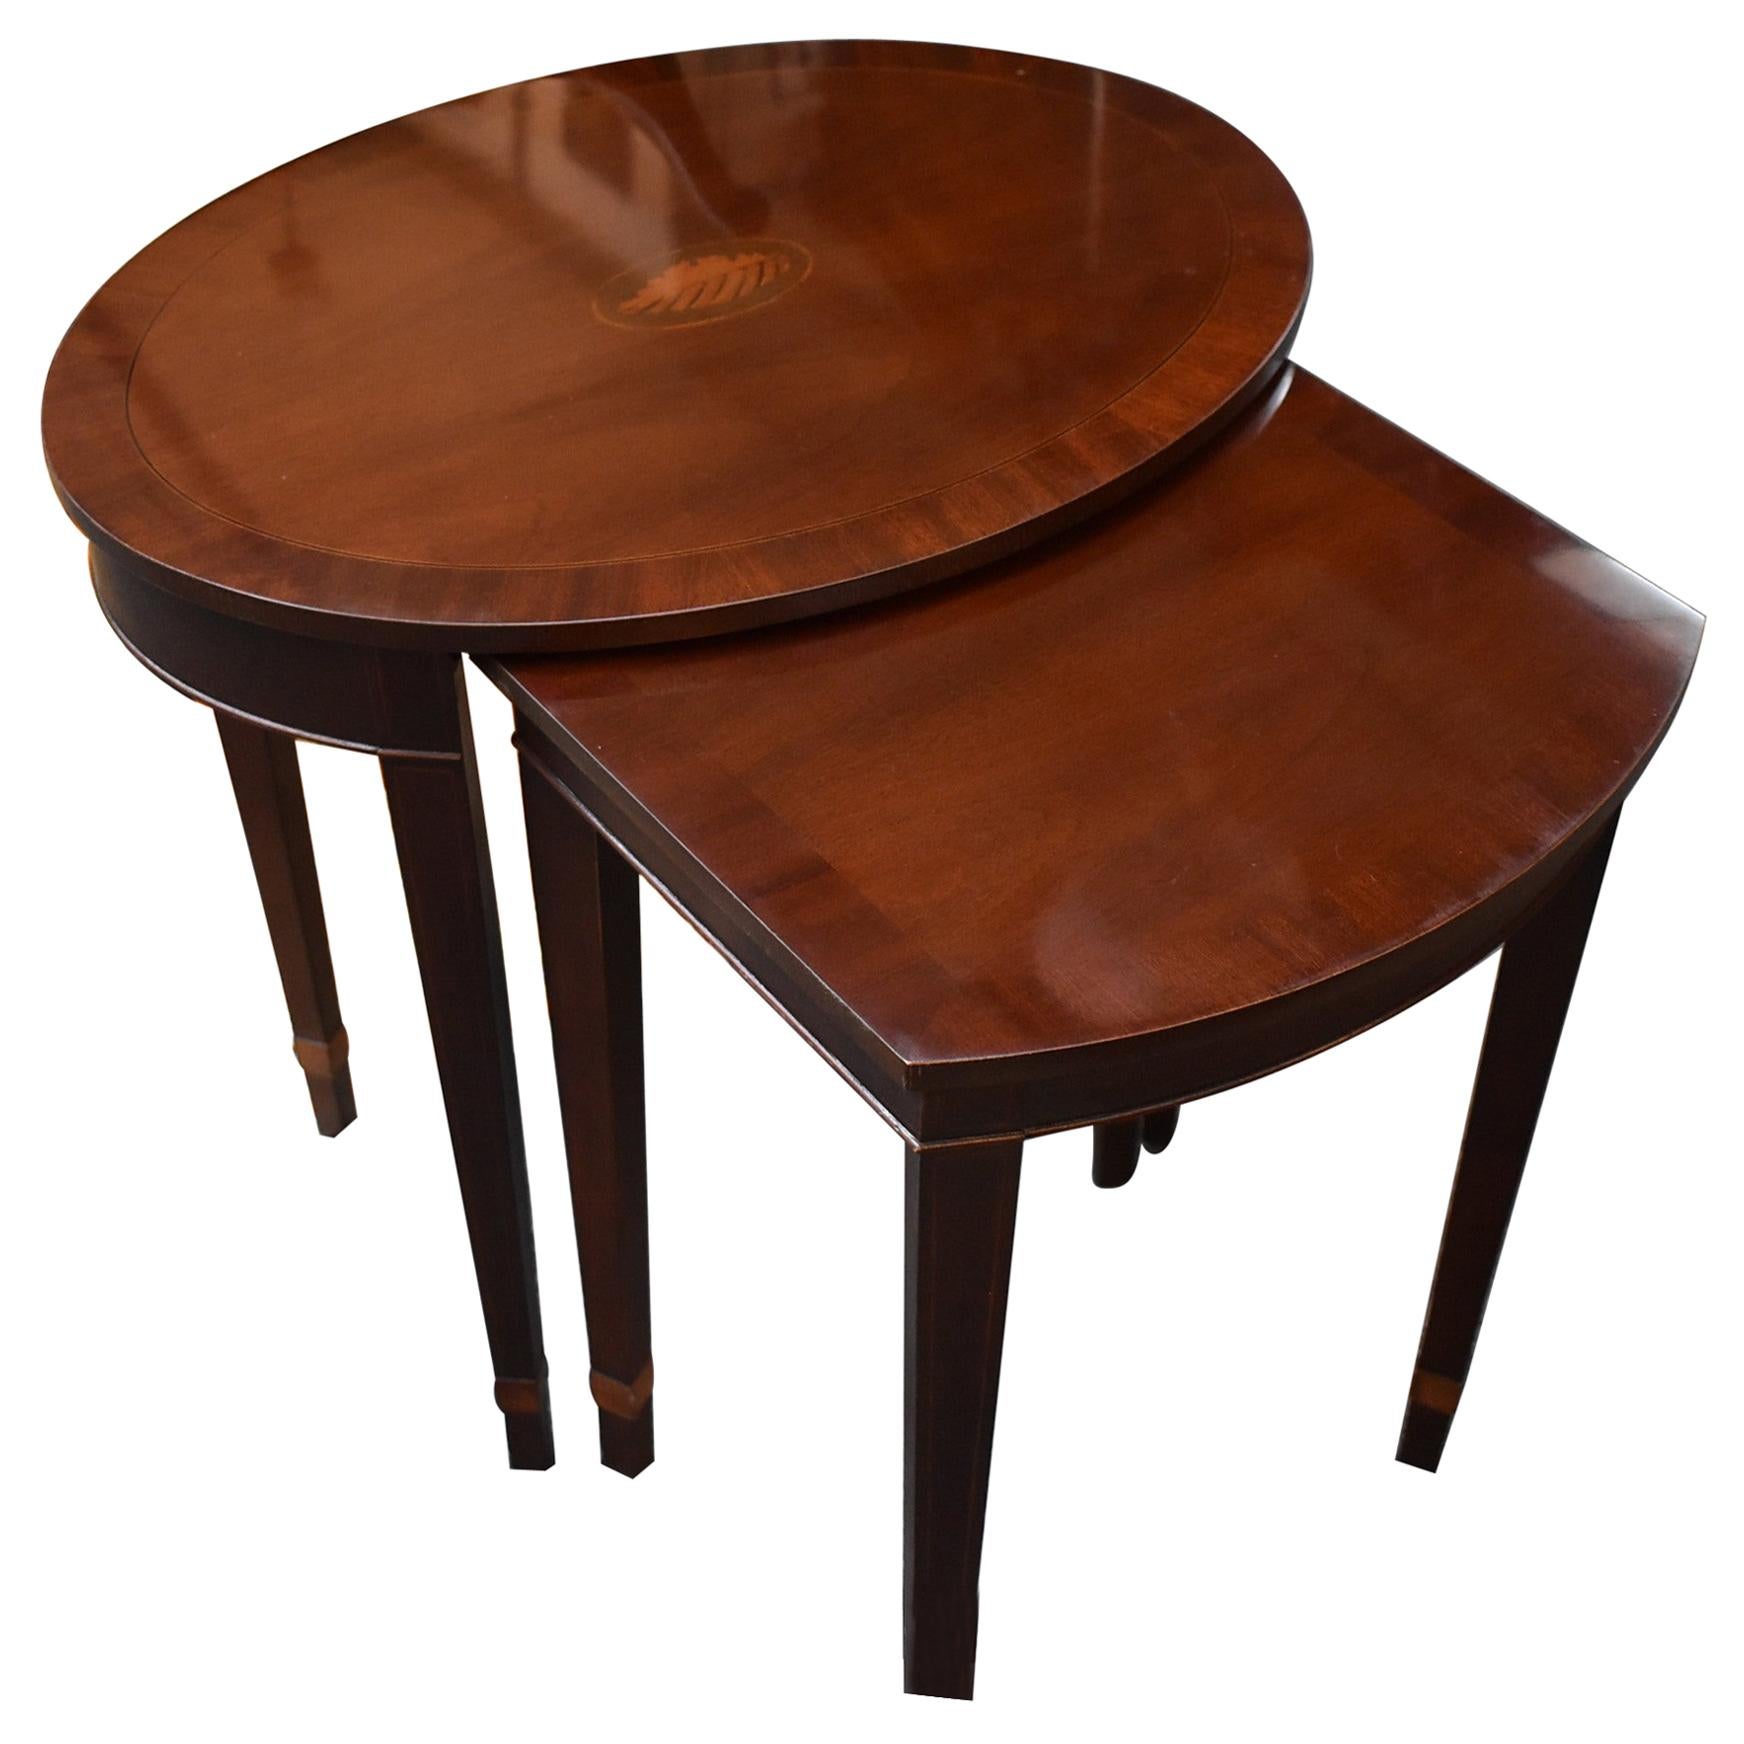 Baker Furniture Oval Nesting Tables Mahogany & Fruitwood Inlay